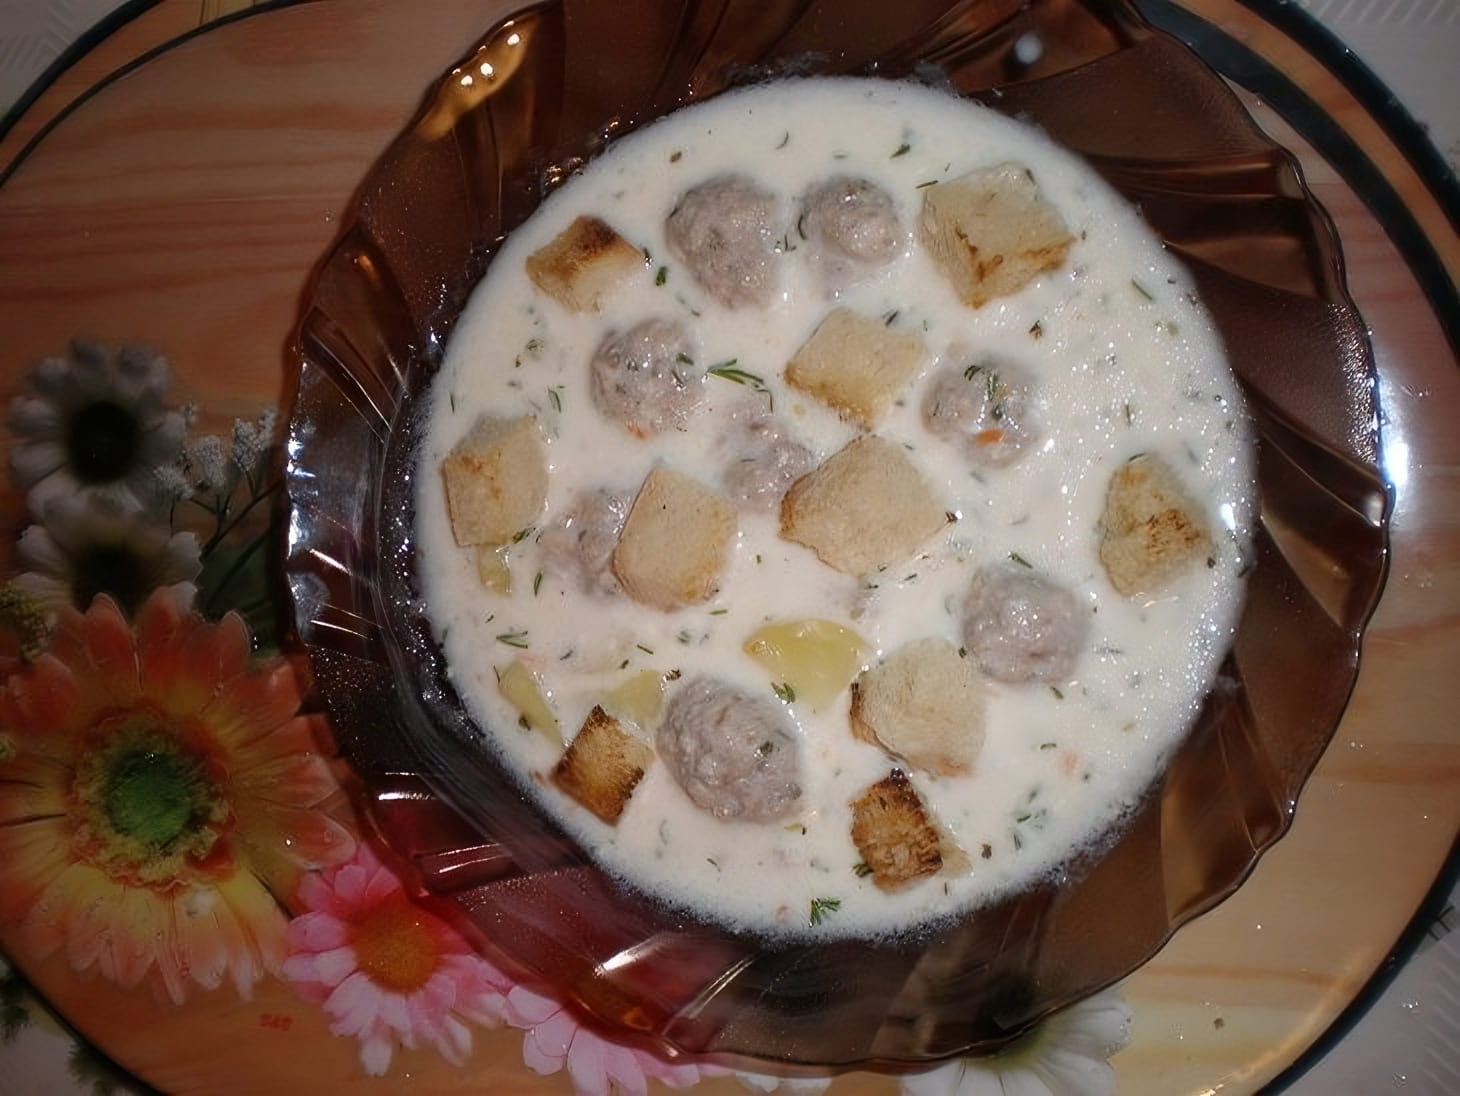 Creamy Meatball Soup with Croutons - A Hearty Delight!